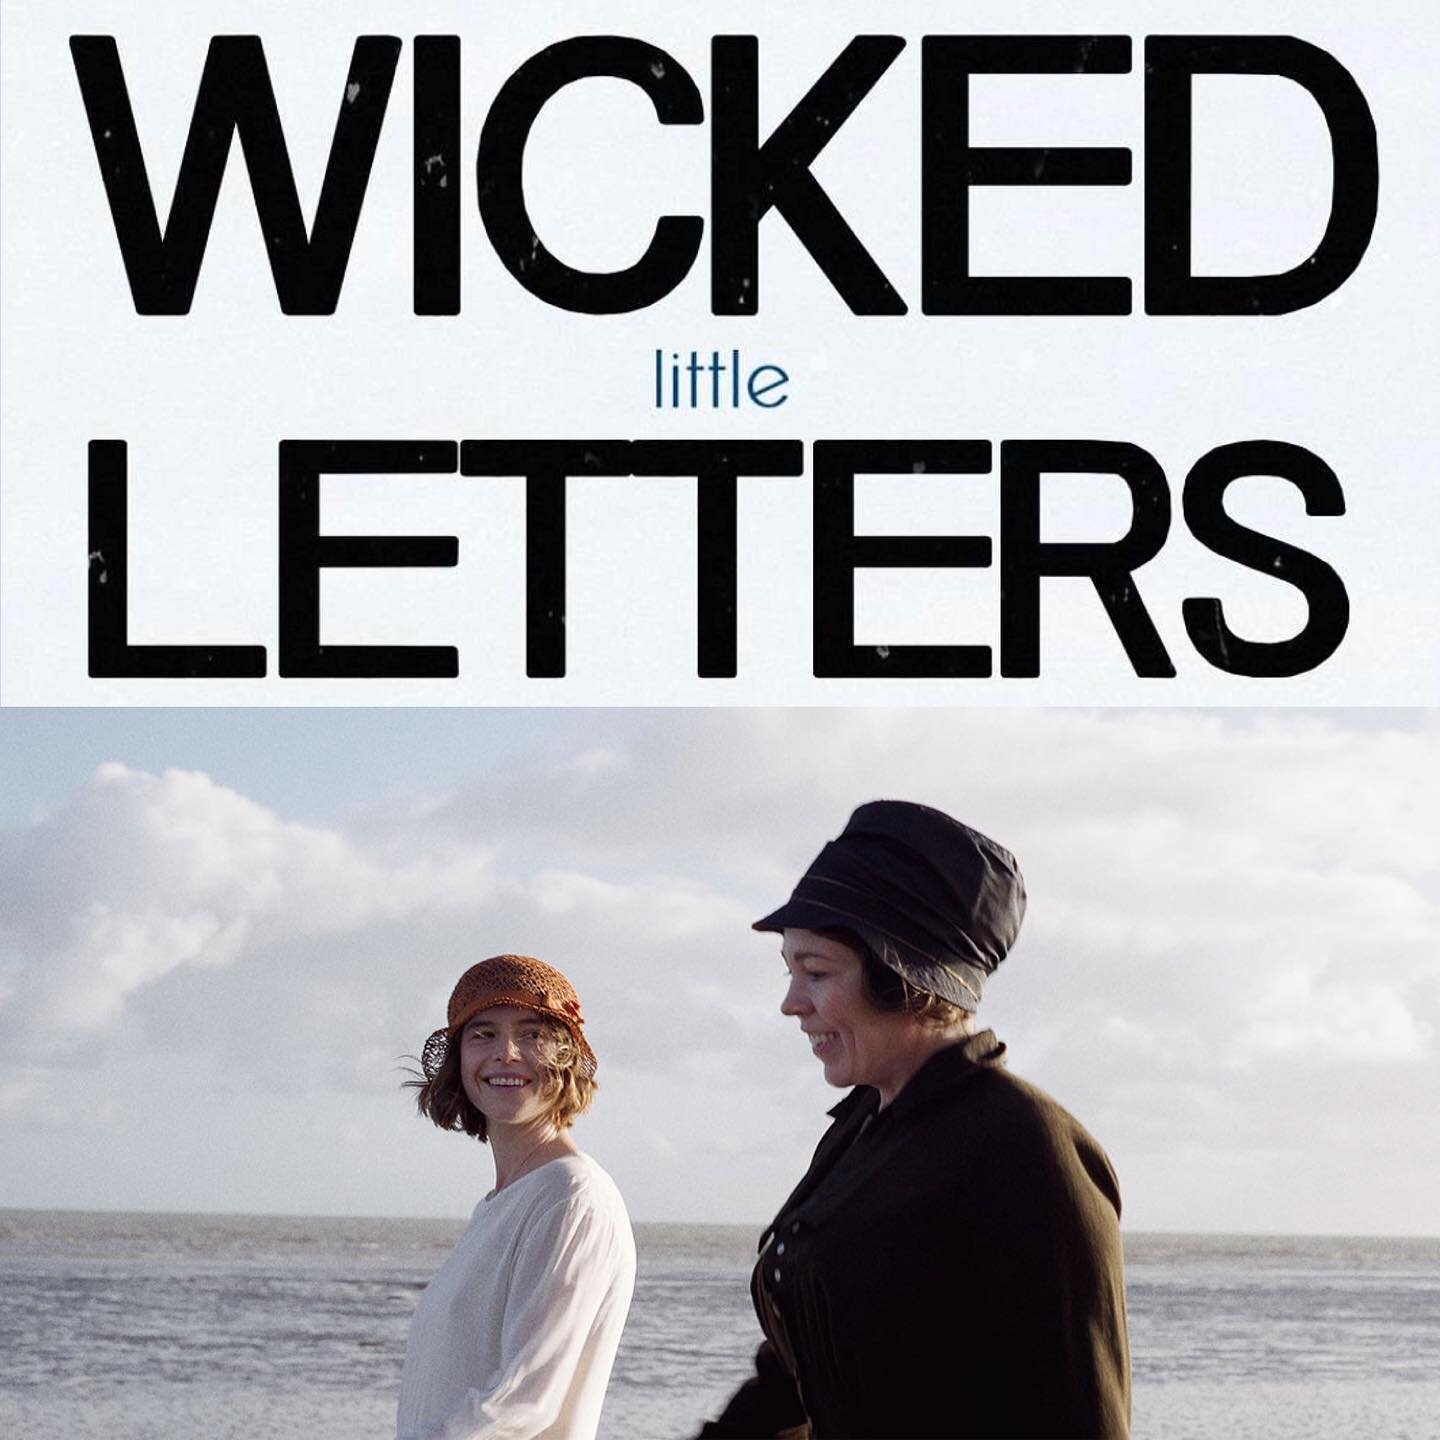 This film is perfectly blended mystery and comedy with Olivia Colman and Jessie Buckley as the pillars of the story. This my kind of movie!
&bull;
The new article about Thea Sharrock&rsquo;s Wicked Little Letters is up on Media Women Worldwide, check